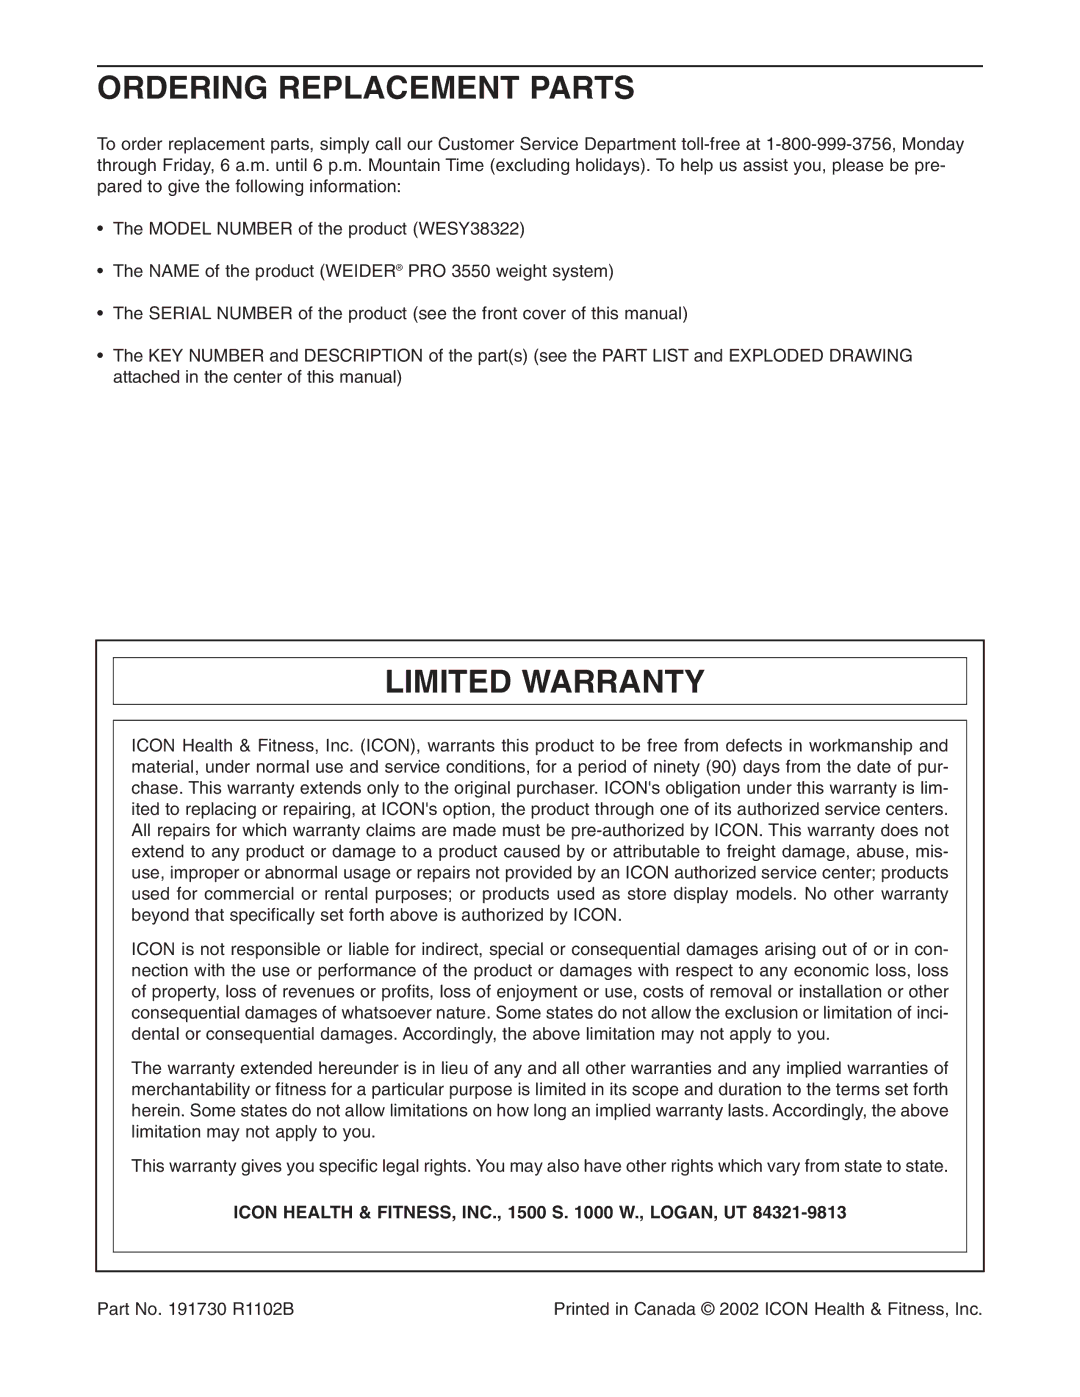 Weider WESY38322 Ordering Replacement Parts, Limited Warranty, Icon Health & FITNESS, INC., 1500 S W., LOGAN, UT 